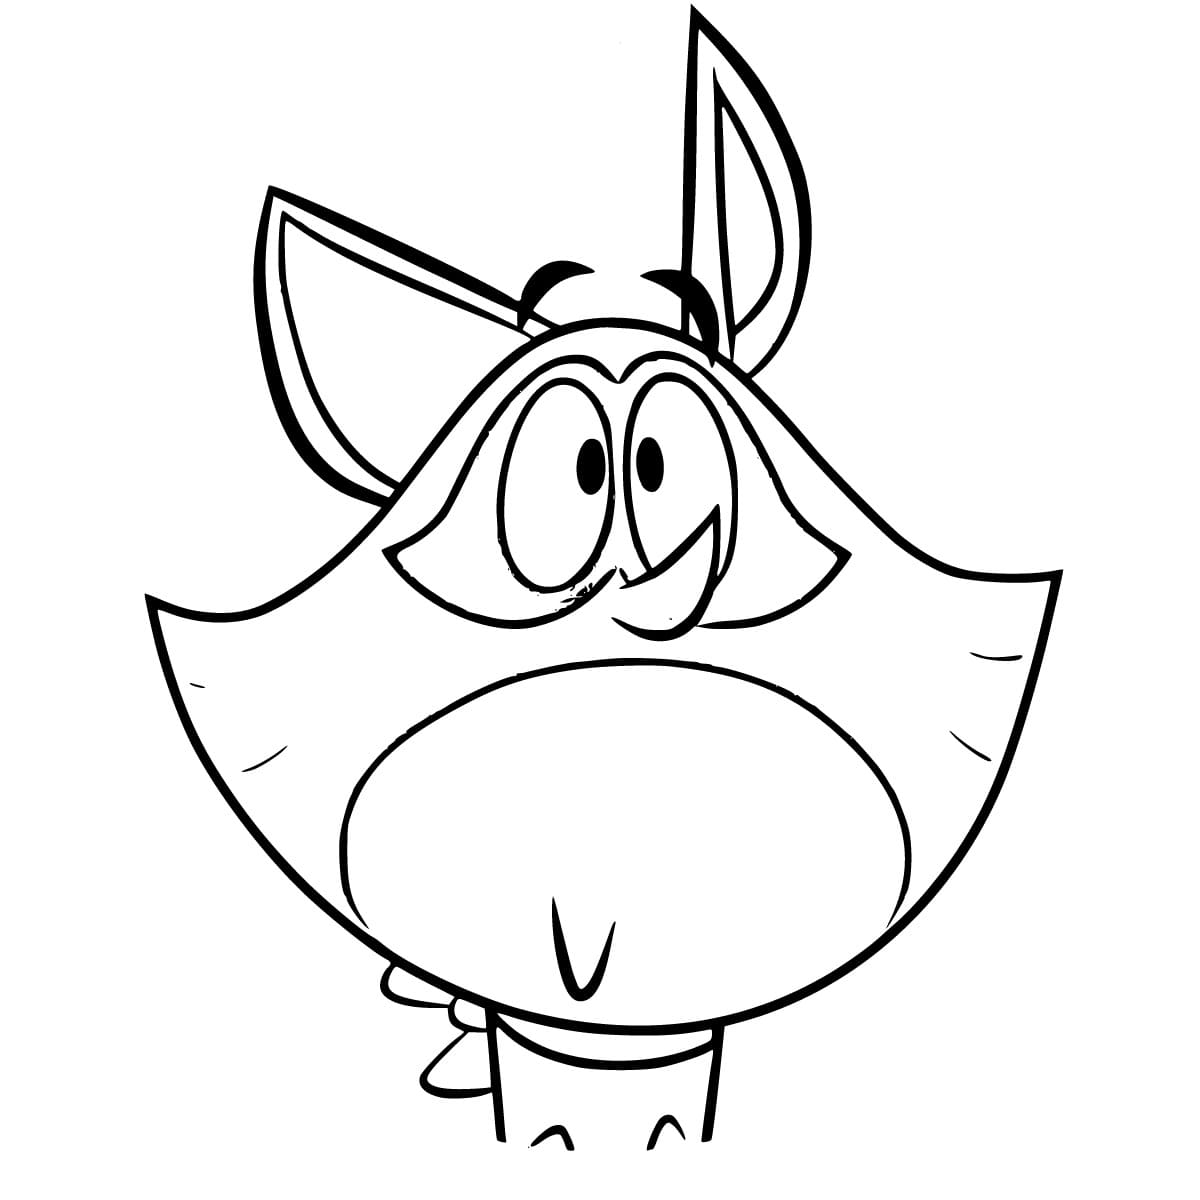 Taffy Souriant coloring page